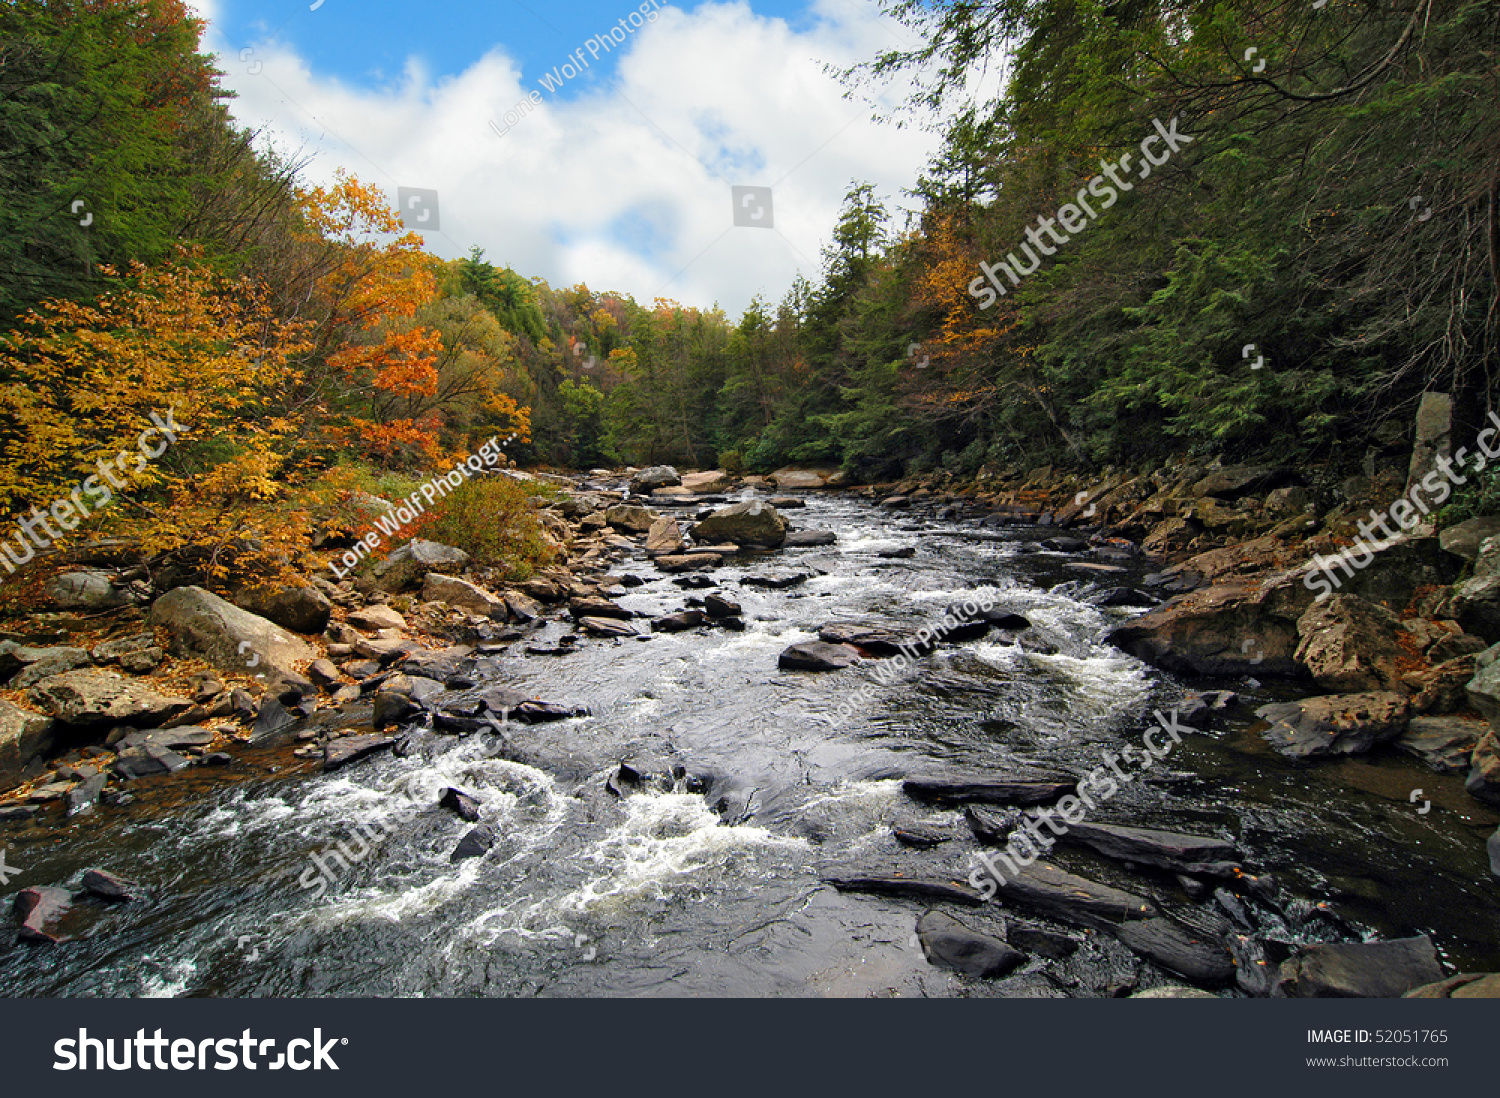 Wild River In Swallow Falls, Md In The Appalachian Mountains In Autumn ...